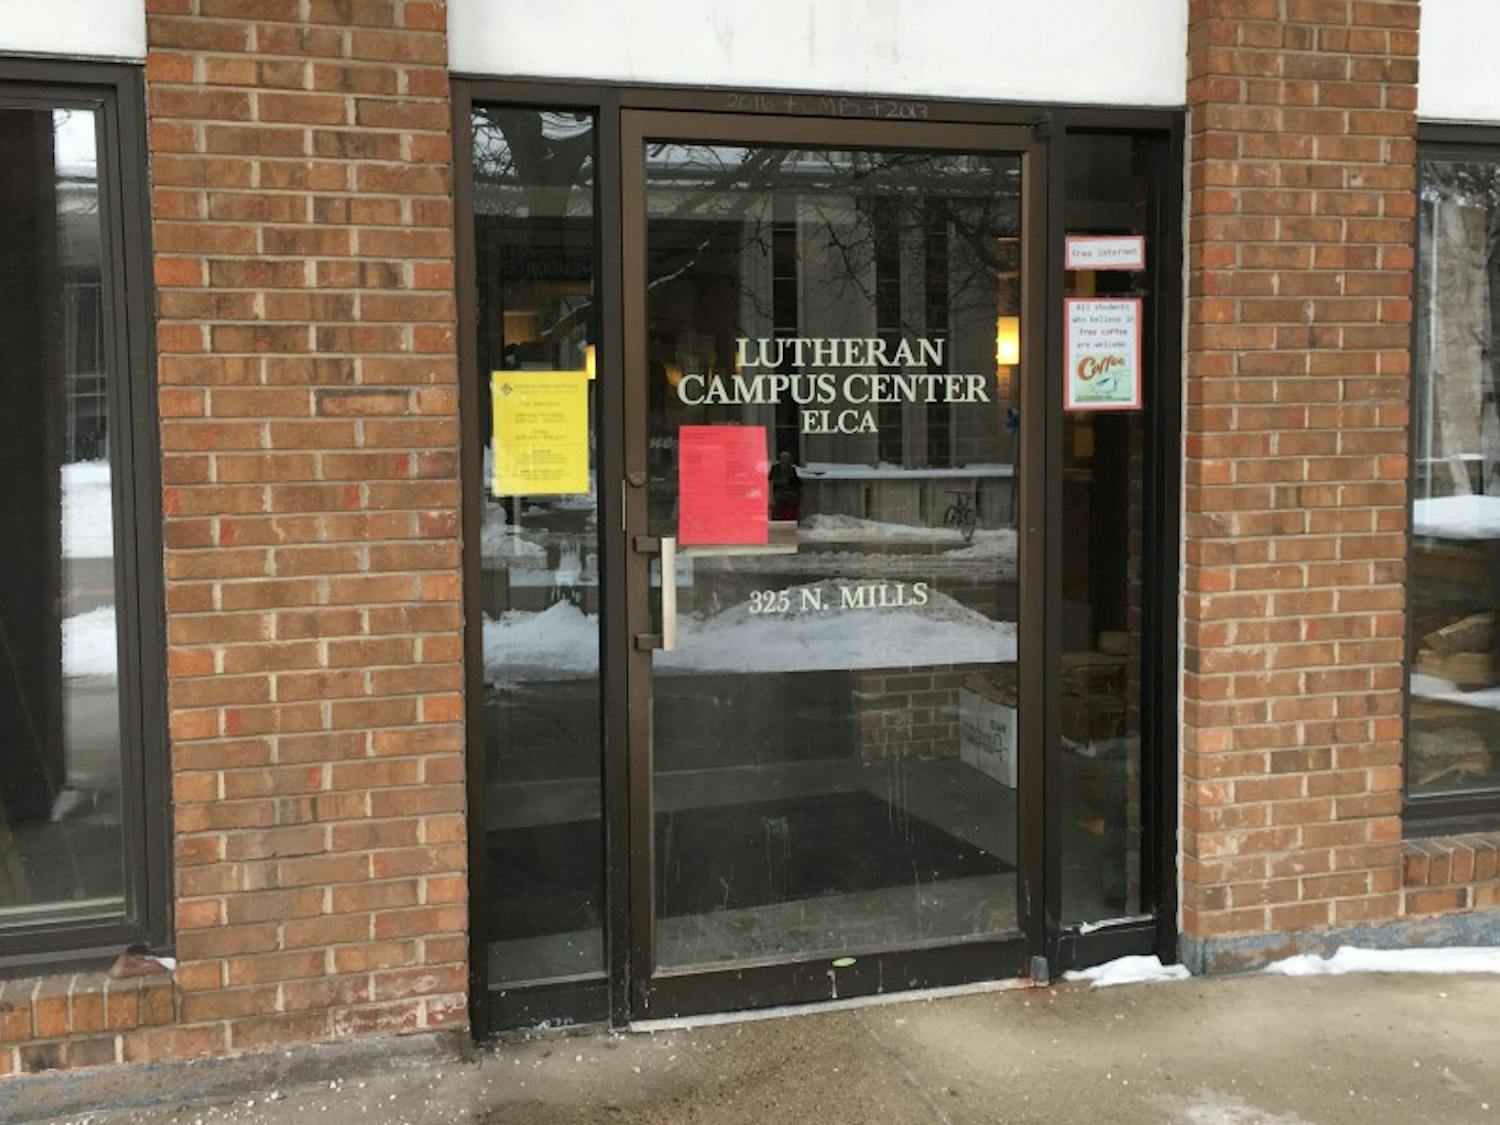 The Badger Caring Closet, which will open in the Lutheran Campus Ministry in spring, will provide a space for low-income UW-Madison students to get free clothes, hygiene products and school supplies.